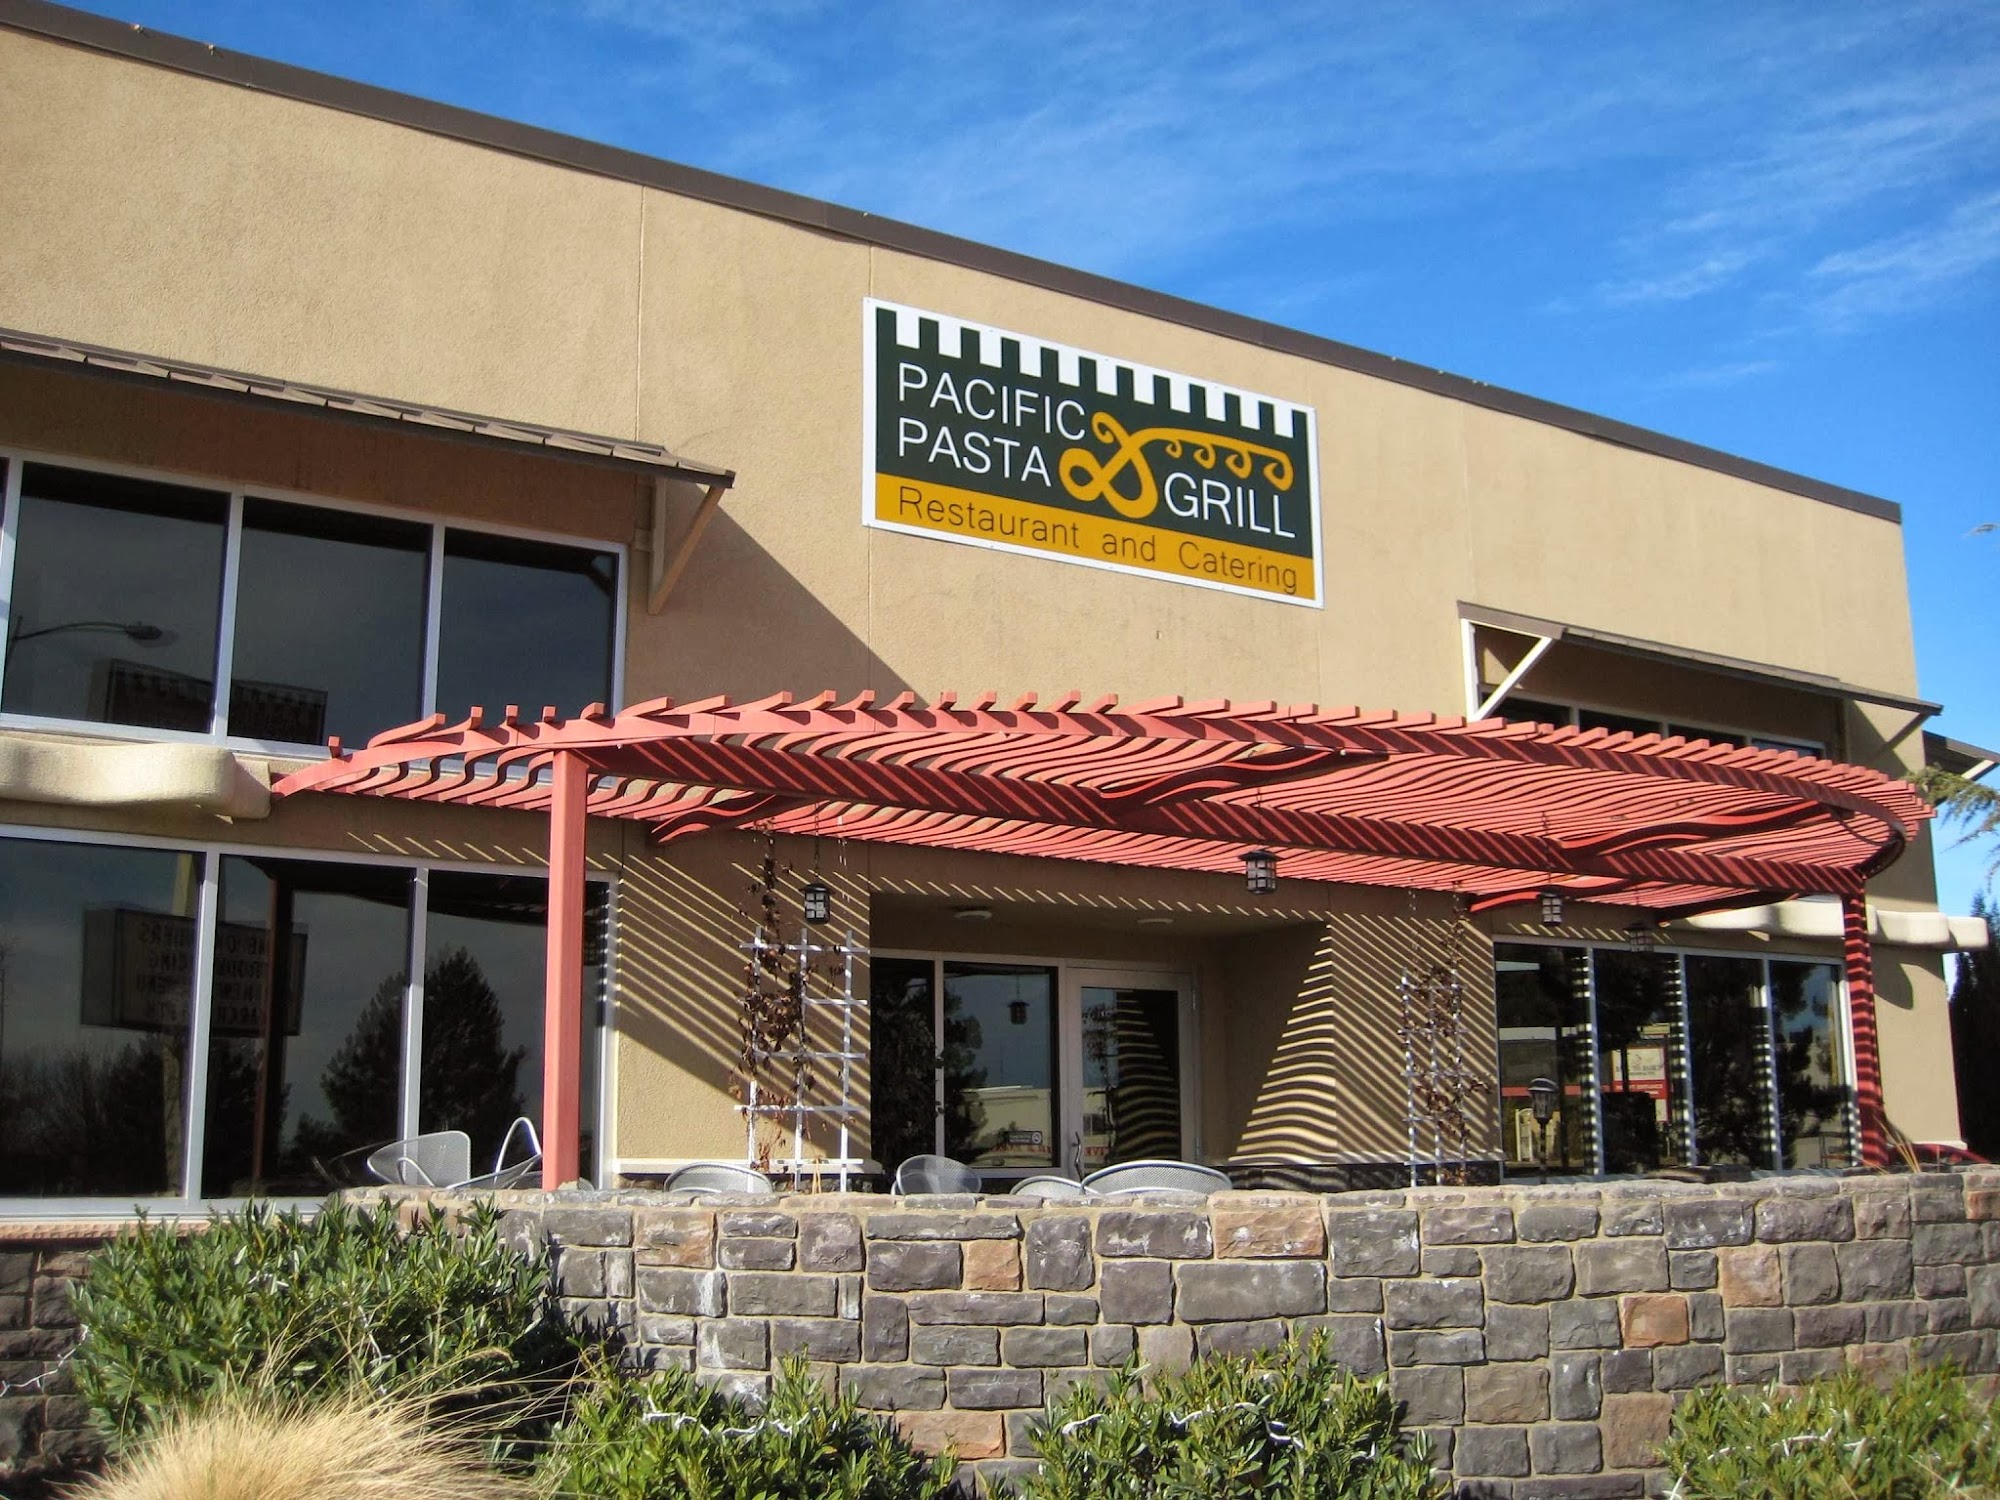 Pacific Pasta and Grill Restaurant and Catering